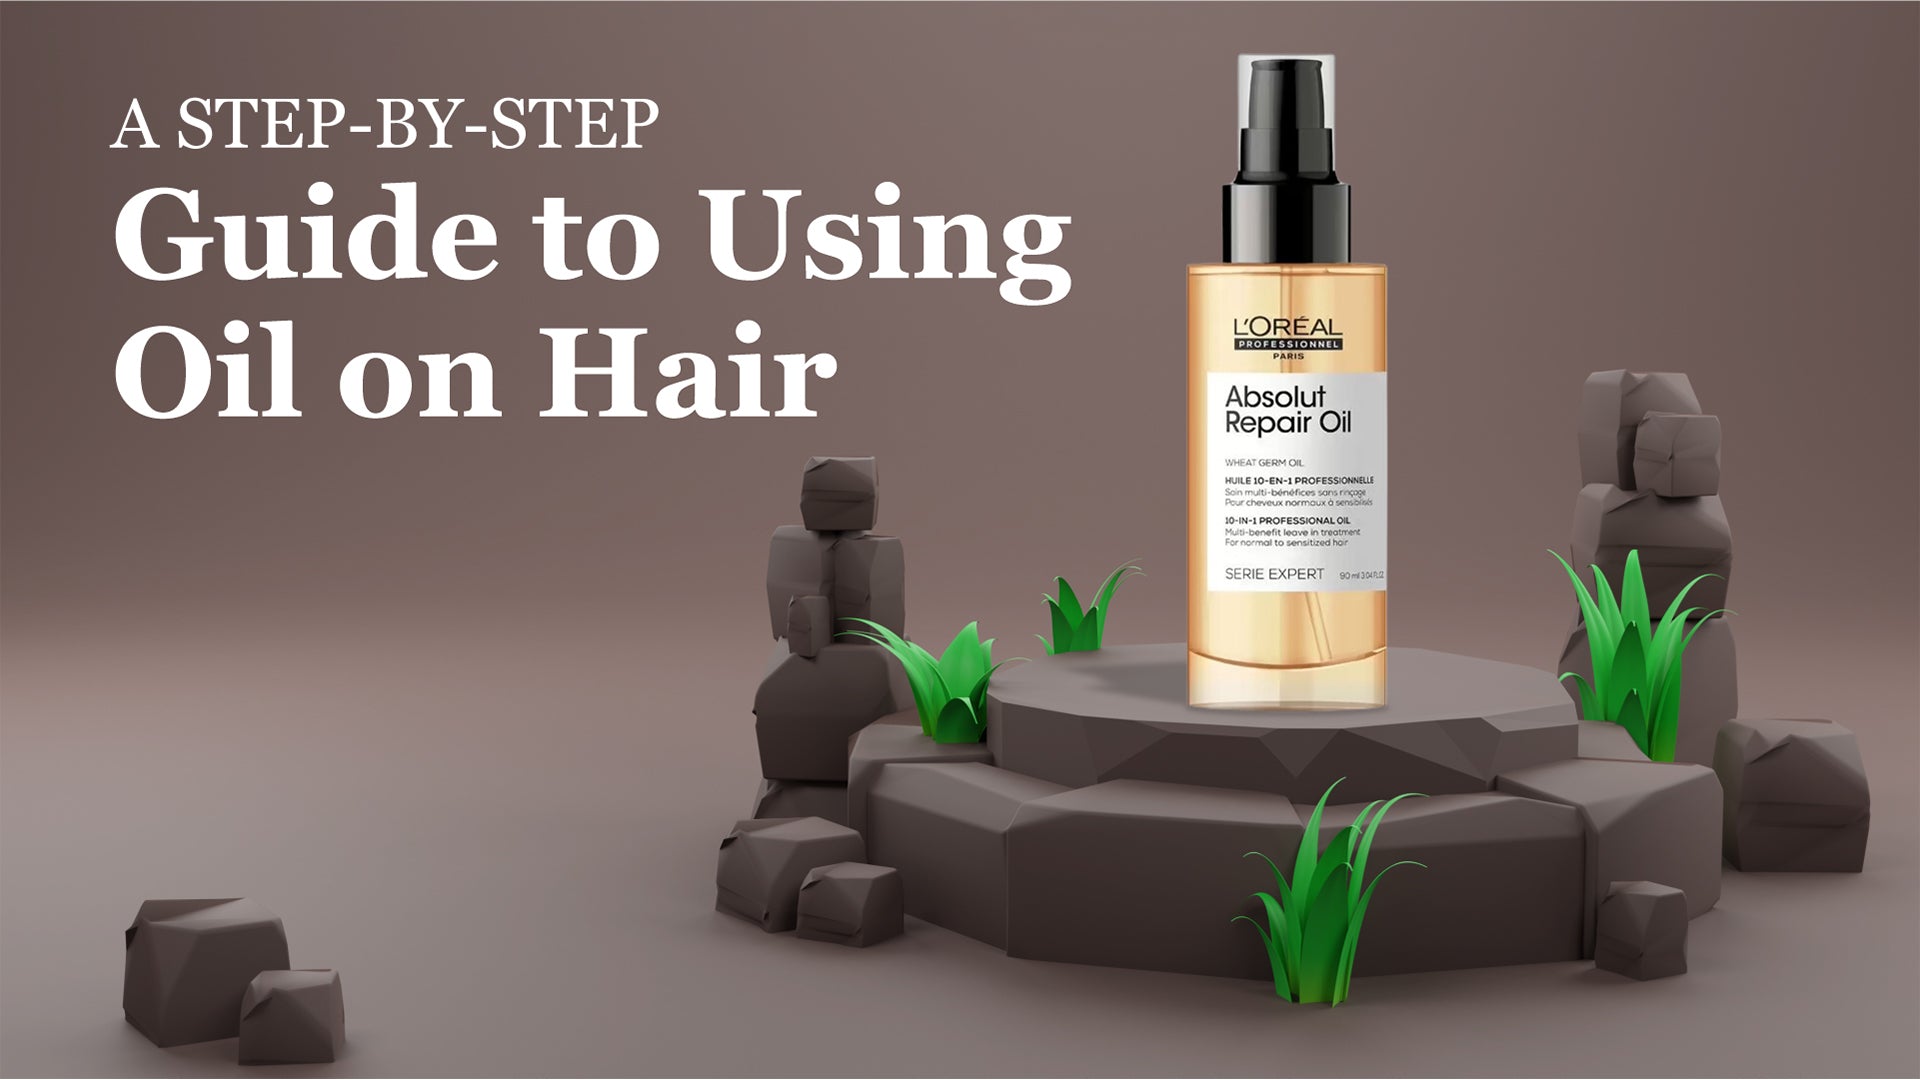 How to use oil on your hair: A step-by-step guide